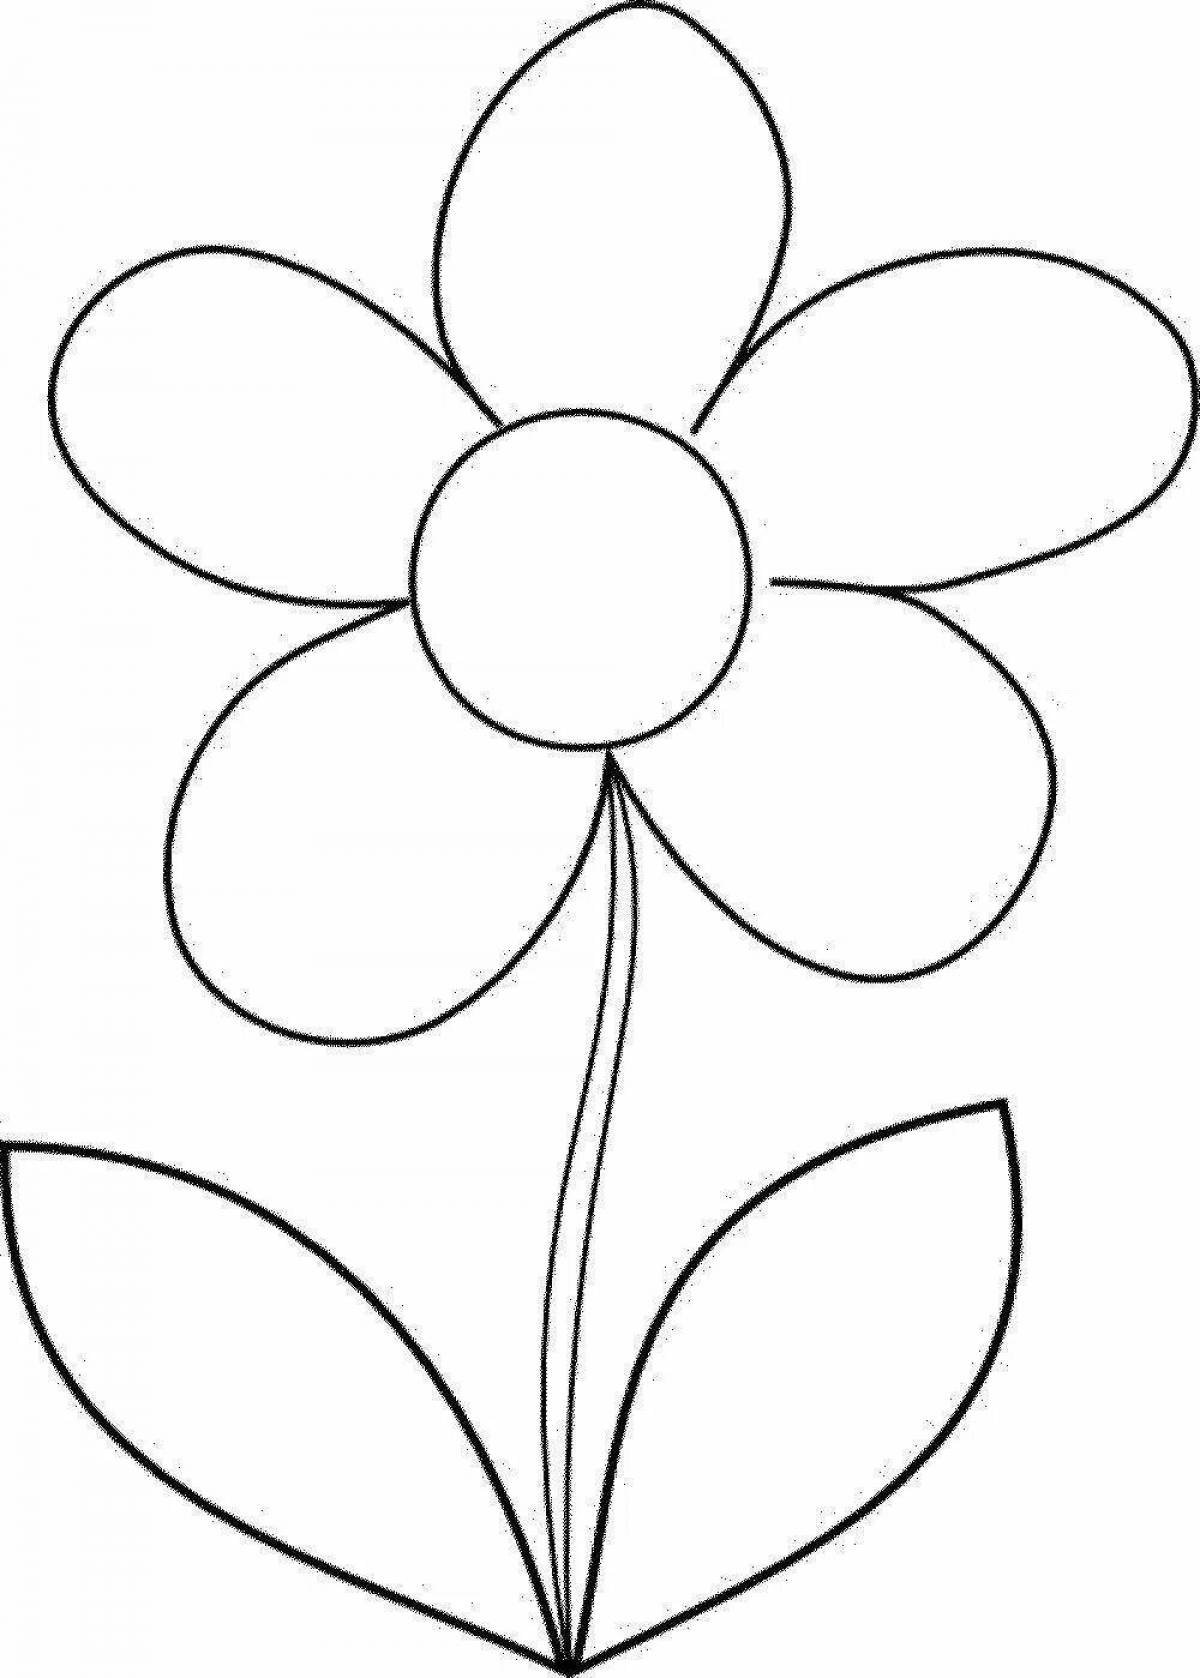 Fun coloring book flower for 5-6 year olds